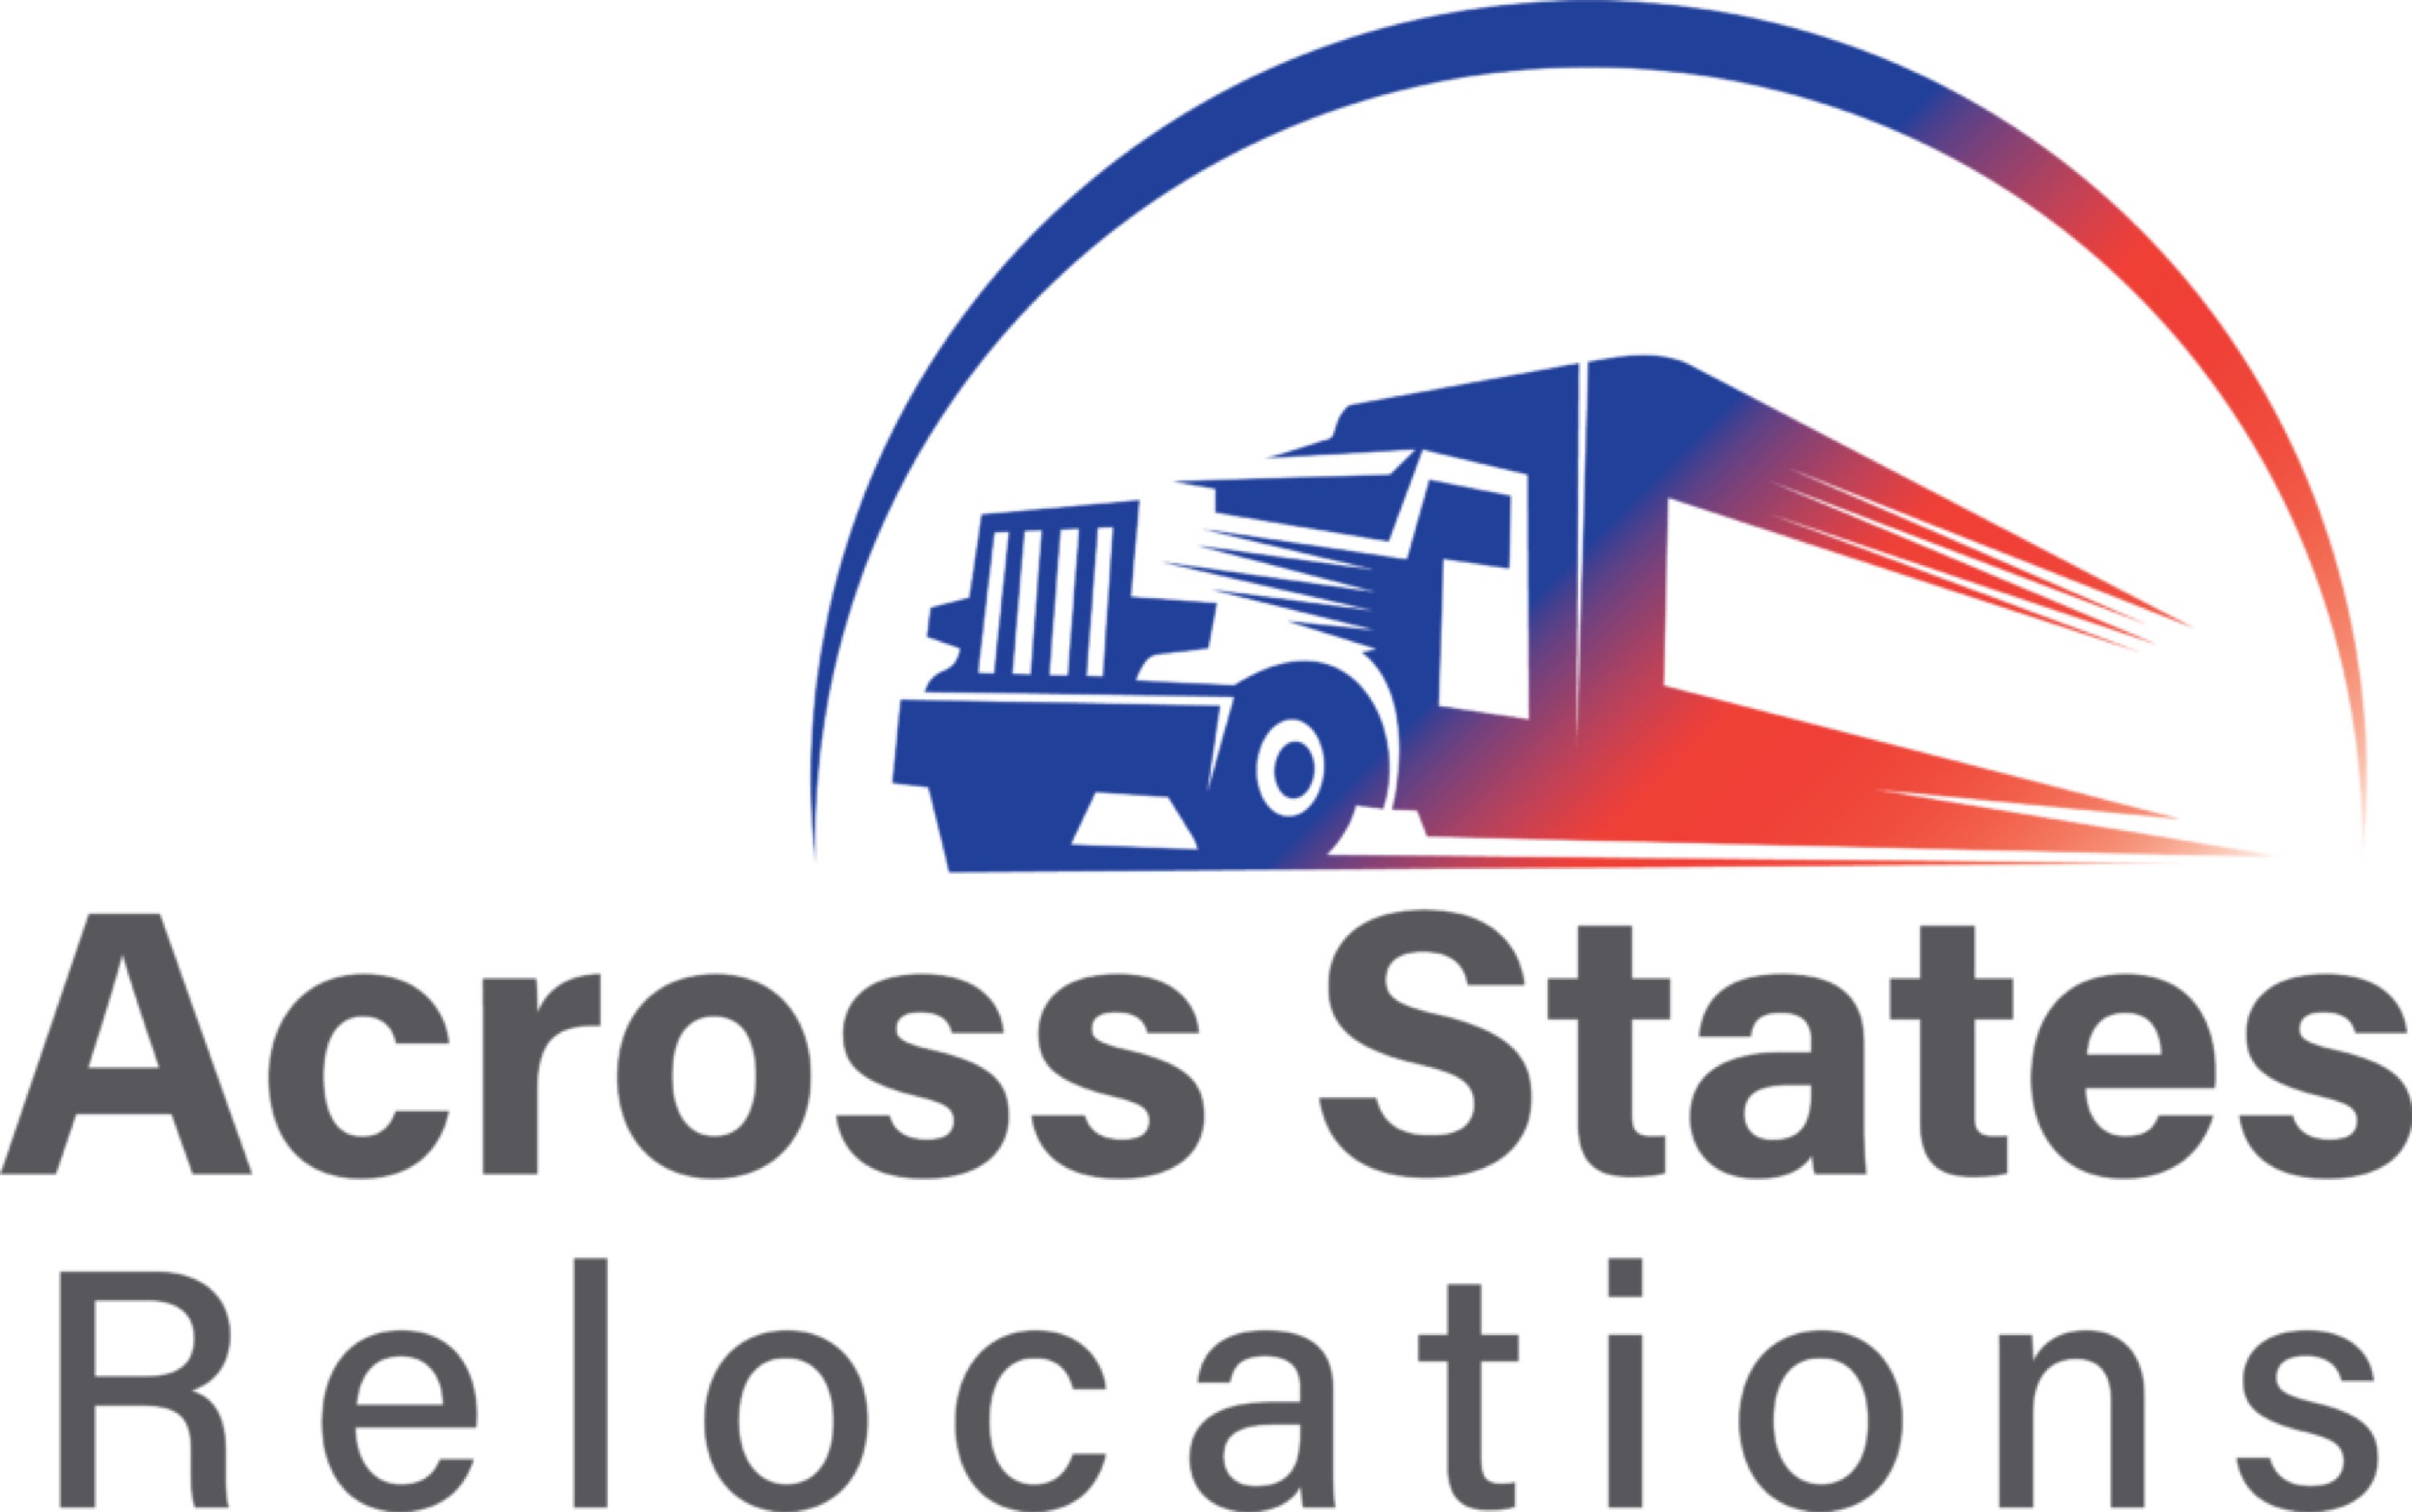 Across States Relocations, Inc. Logo